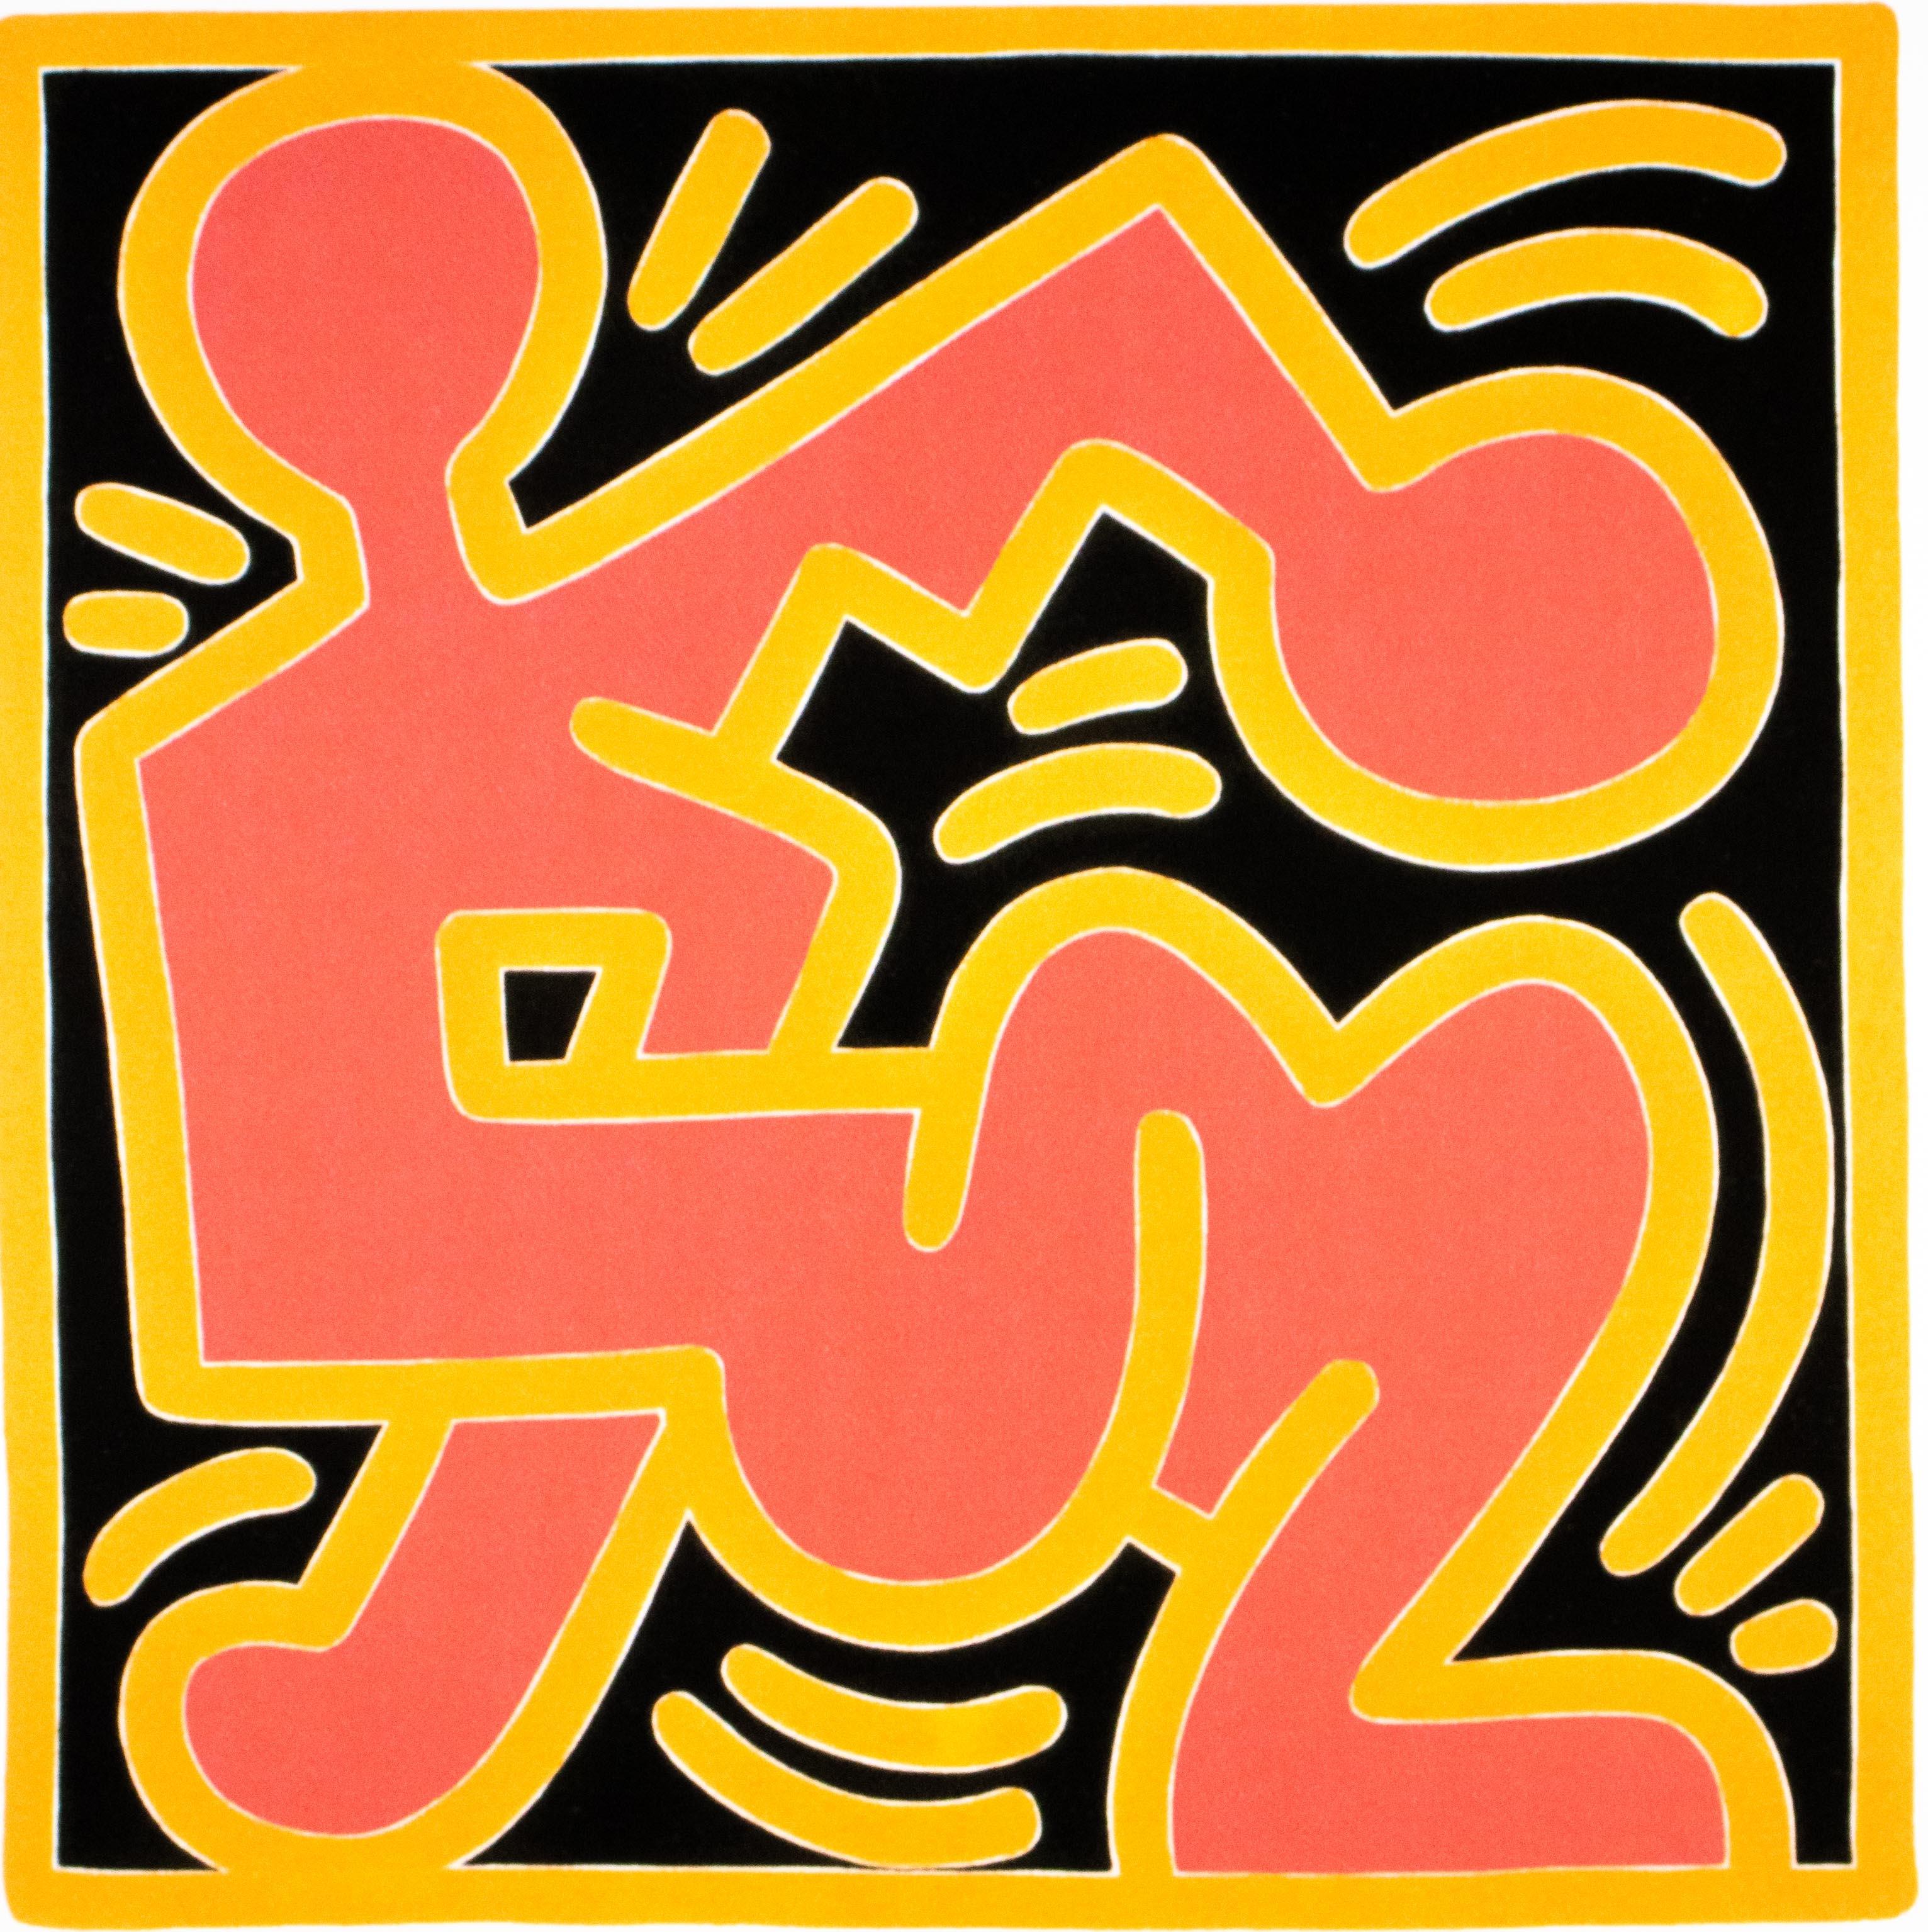 KEITH HARING - Untitled
Limited 1990s edition by the Keith Haring Foundation, Inc.

Only 150 copies total (here 15/150).
Lithograph on thick cardboard.

Signed in plate.
Edition hand numbered in pencil.
With Keith Haring Foundation blind stamp at